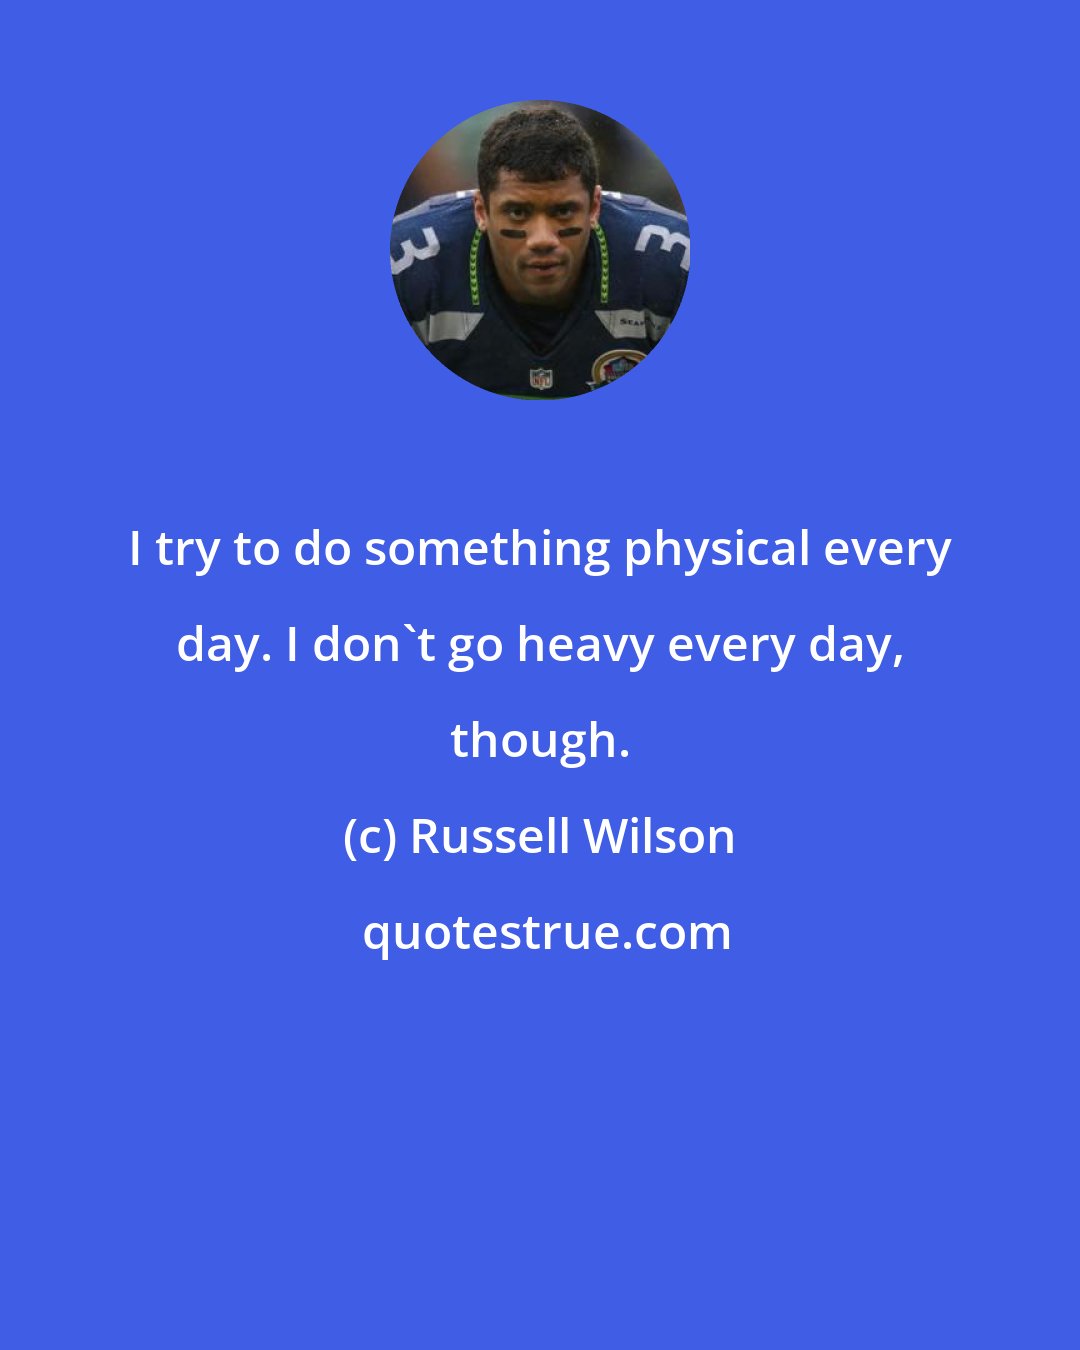 Russell Wilson: I try to do something physical every day. I don't go heavy every day, though.